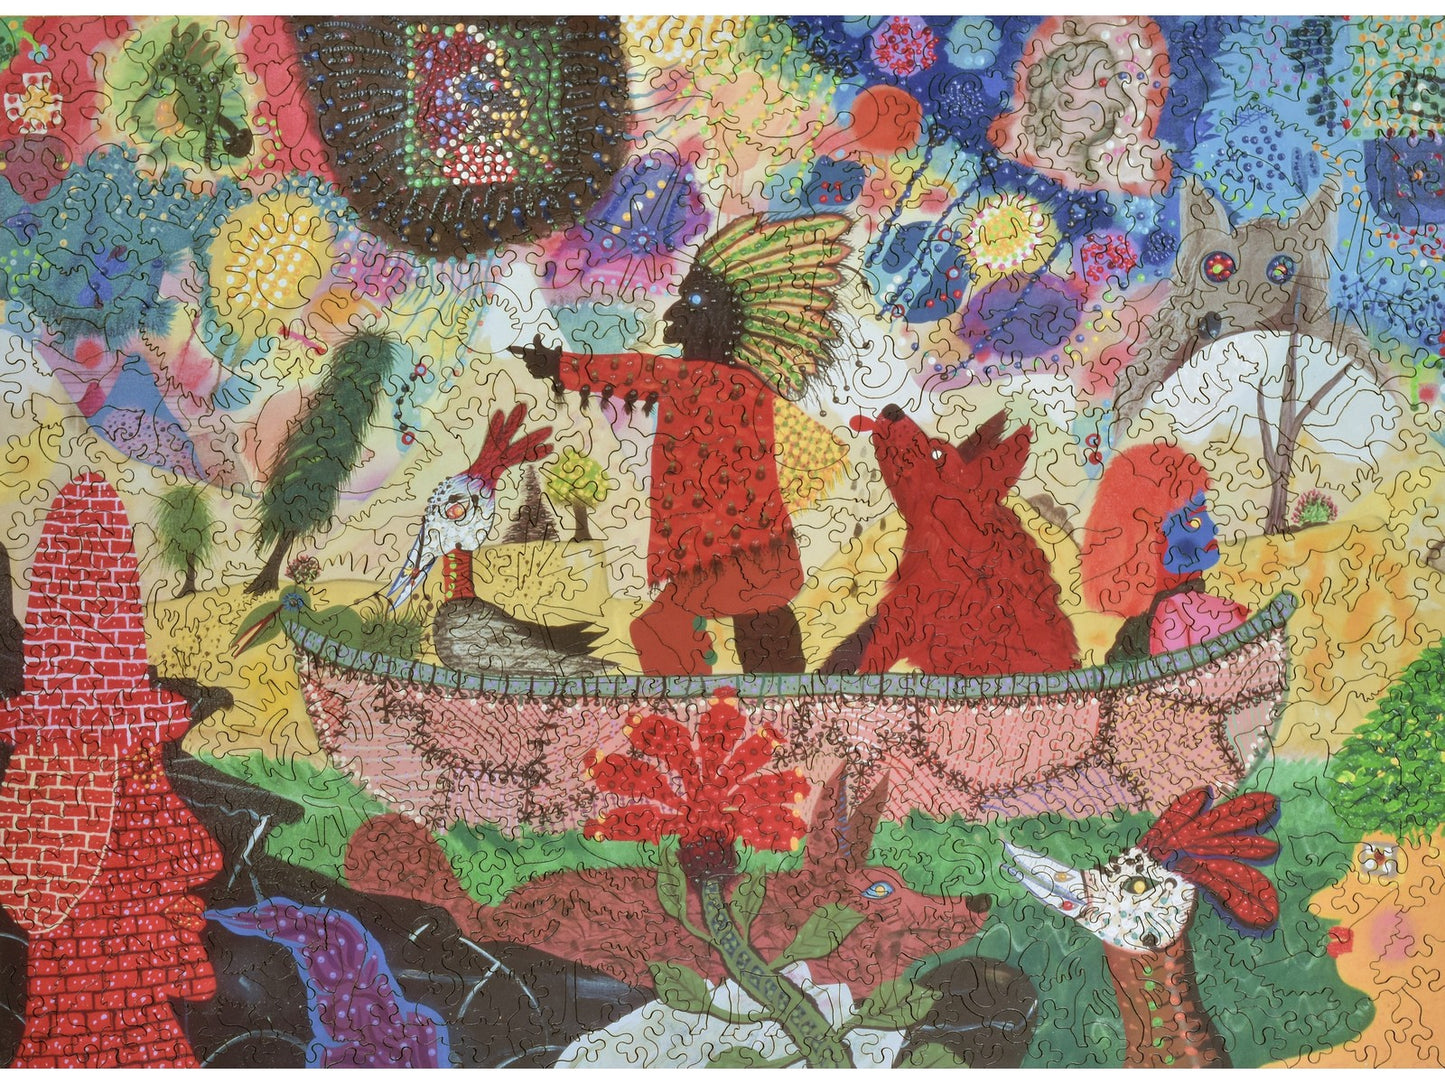 The front of the puzzle, Canoe of Fate, showing two people and animals in a canoe.